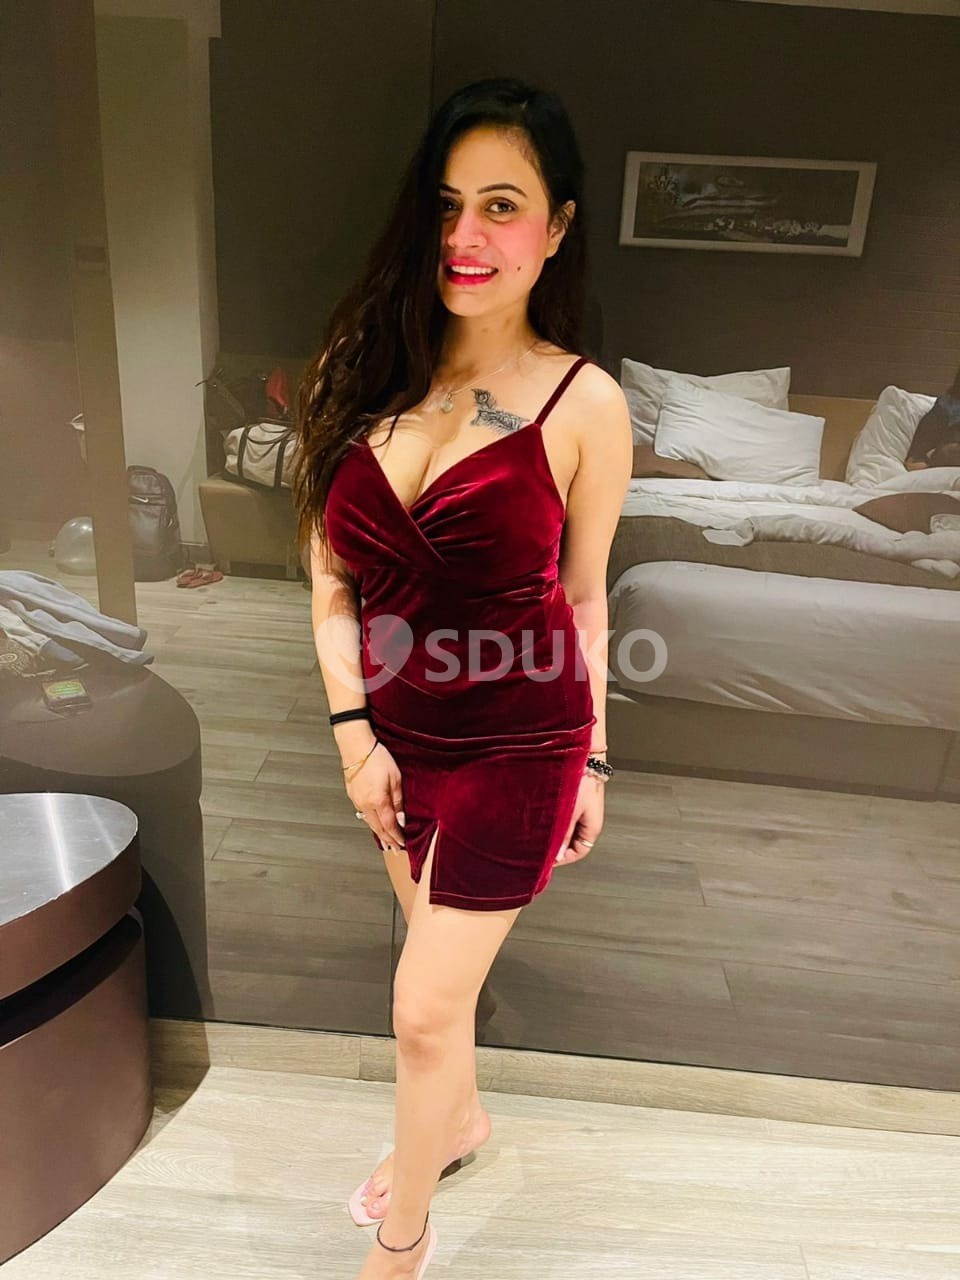 Vasai vihar 🌟🌟❣️Low price high profile college girl and aunty available 24×7 service available ❣️❣️